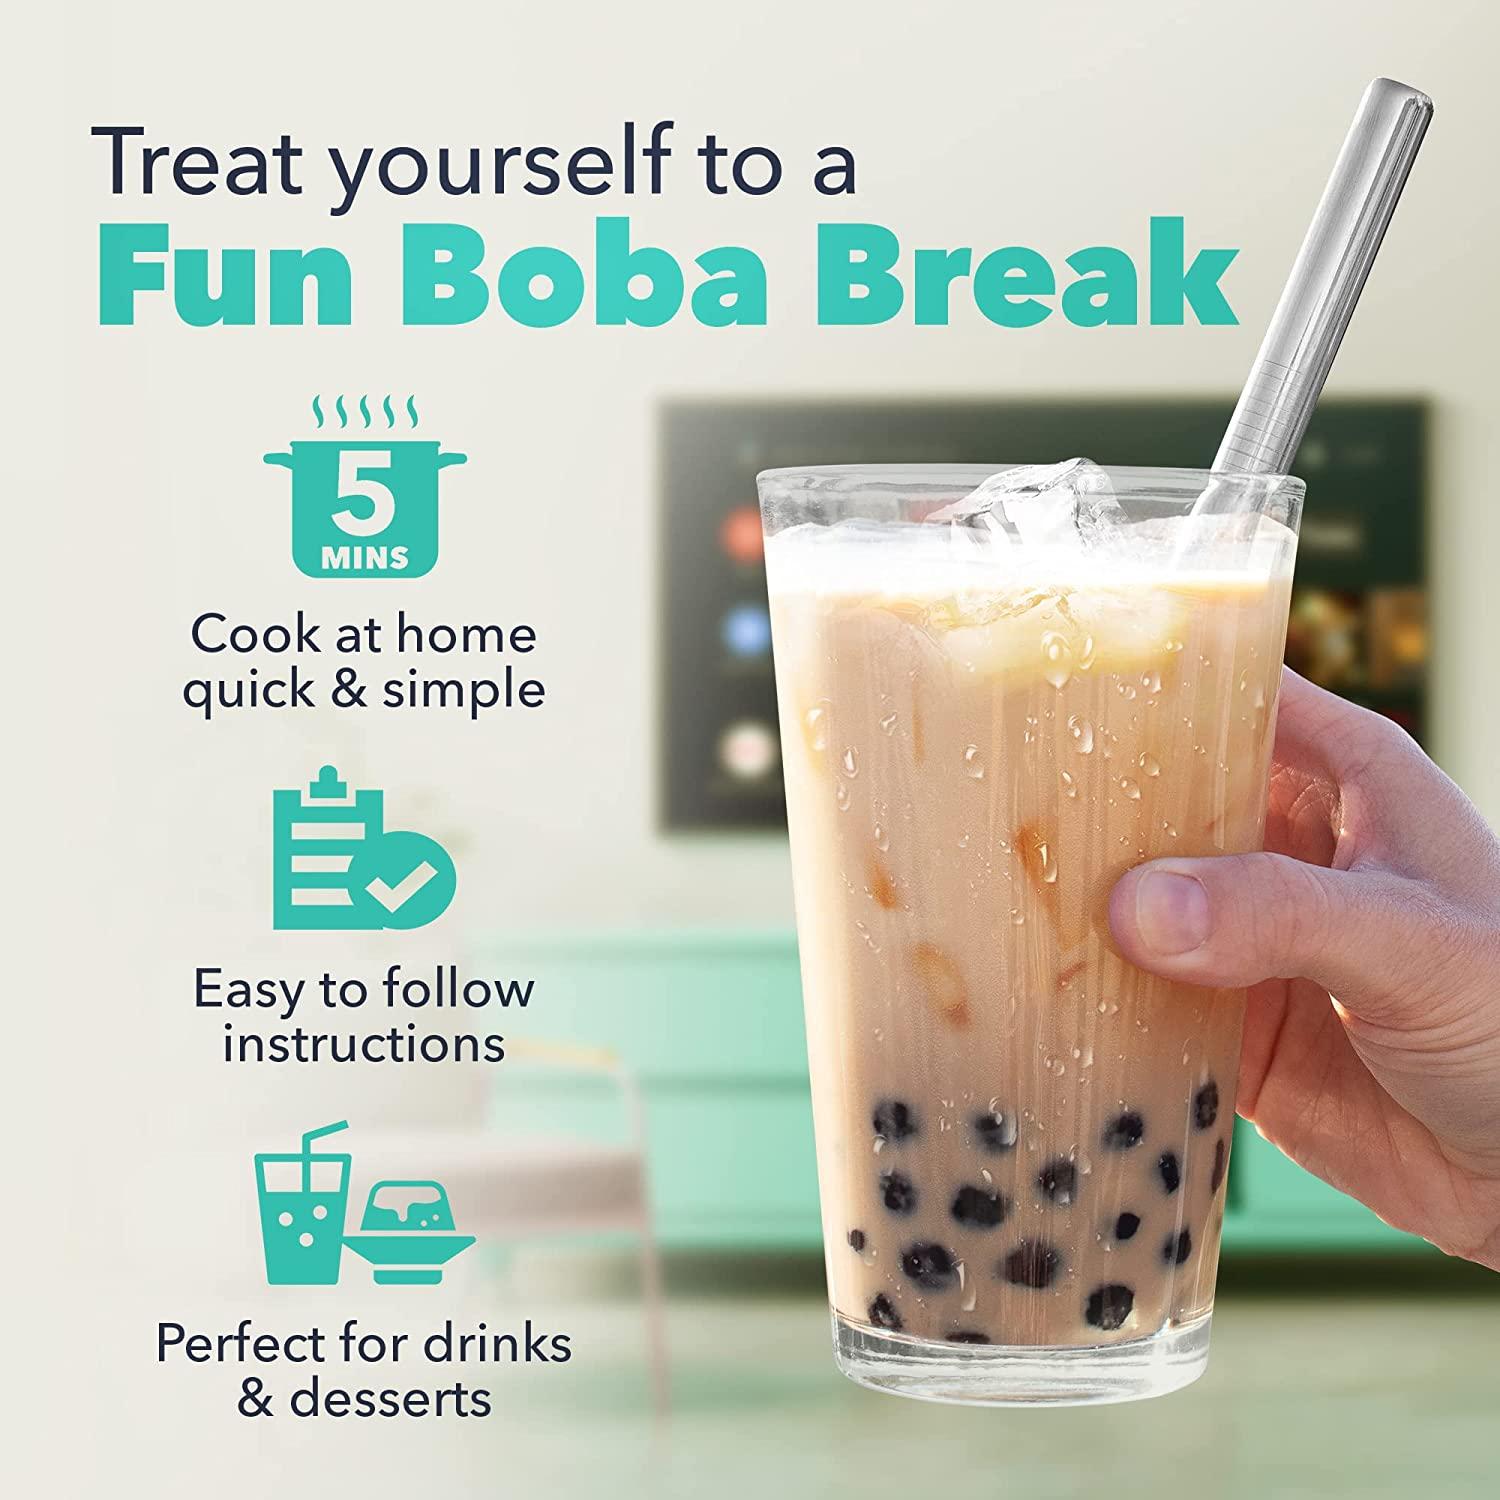 Brew up your own bubble tea with our DIY Bubble Tea Kit! Coming